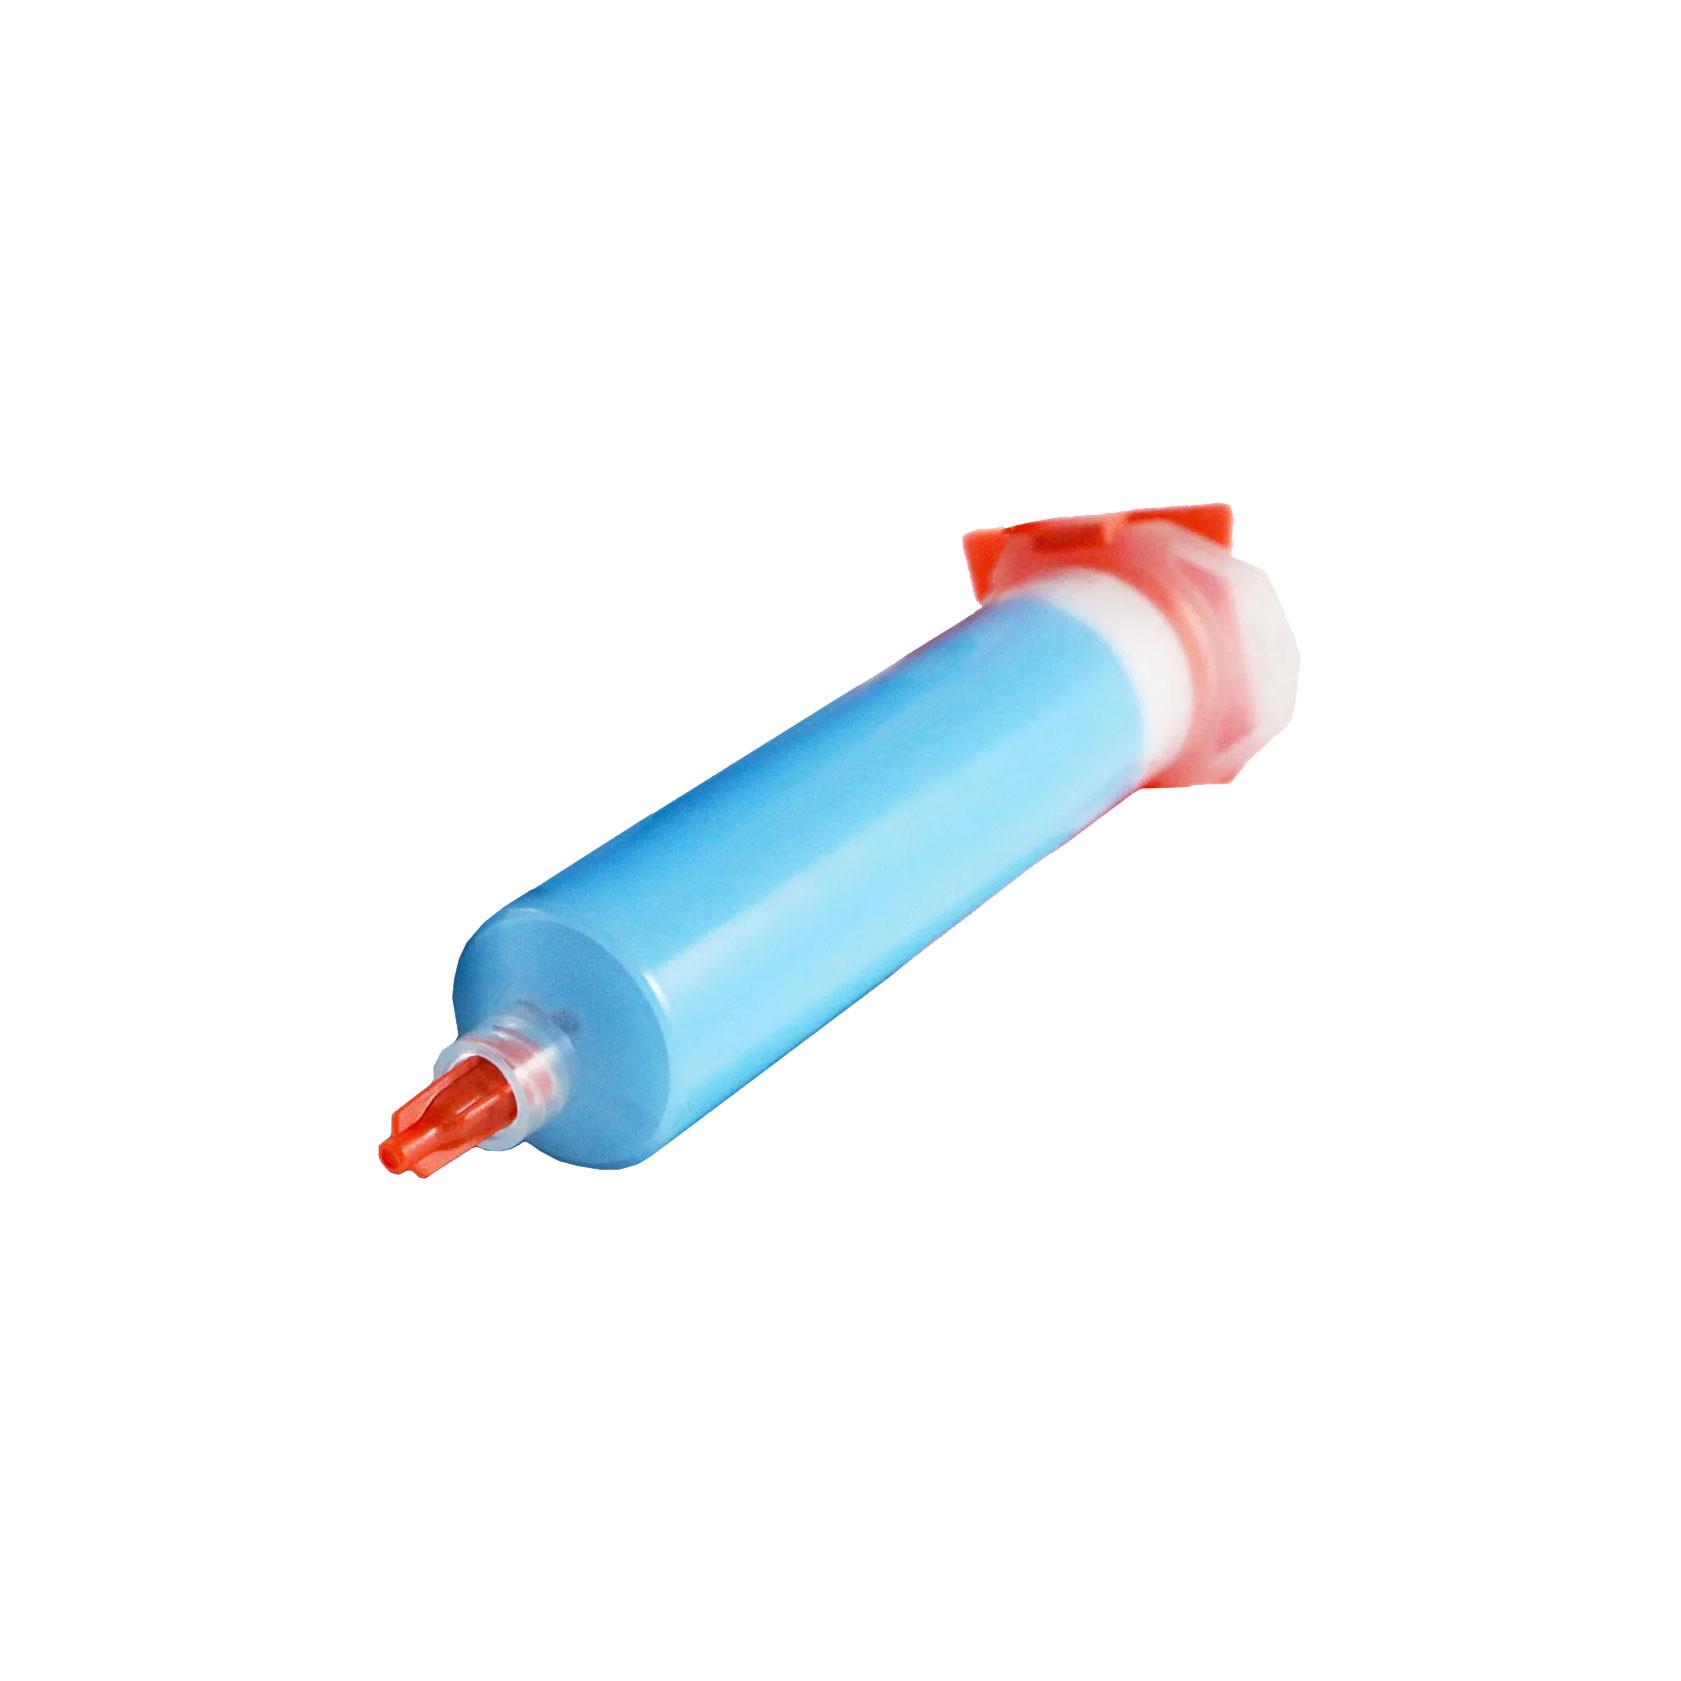 【TG6060-D-1000】SILICONE PUTTY 1KG BLUE